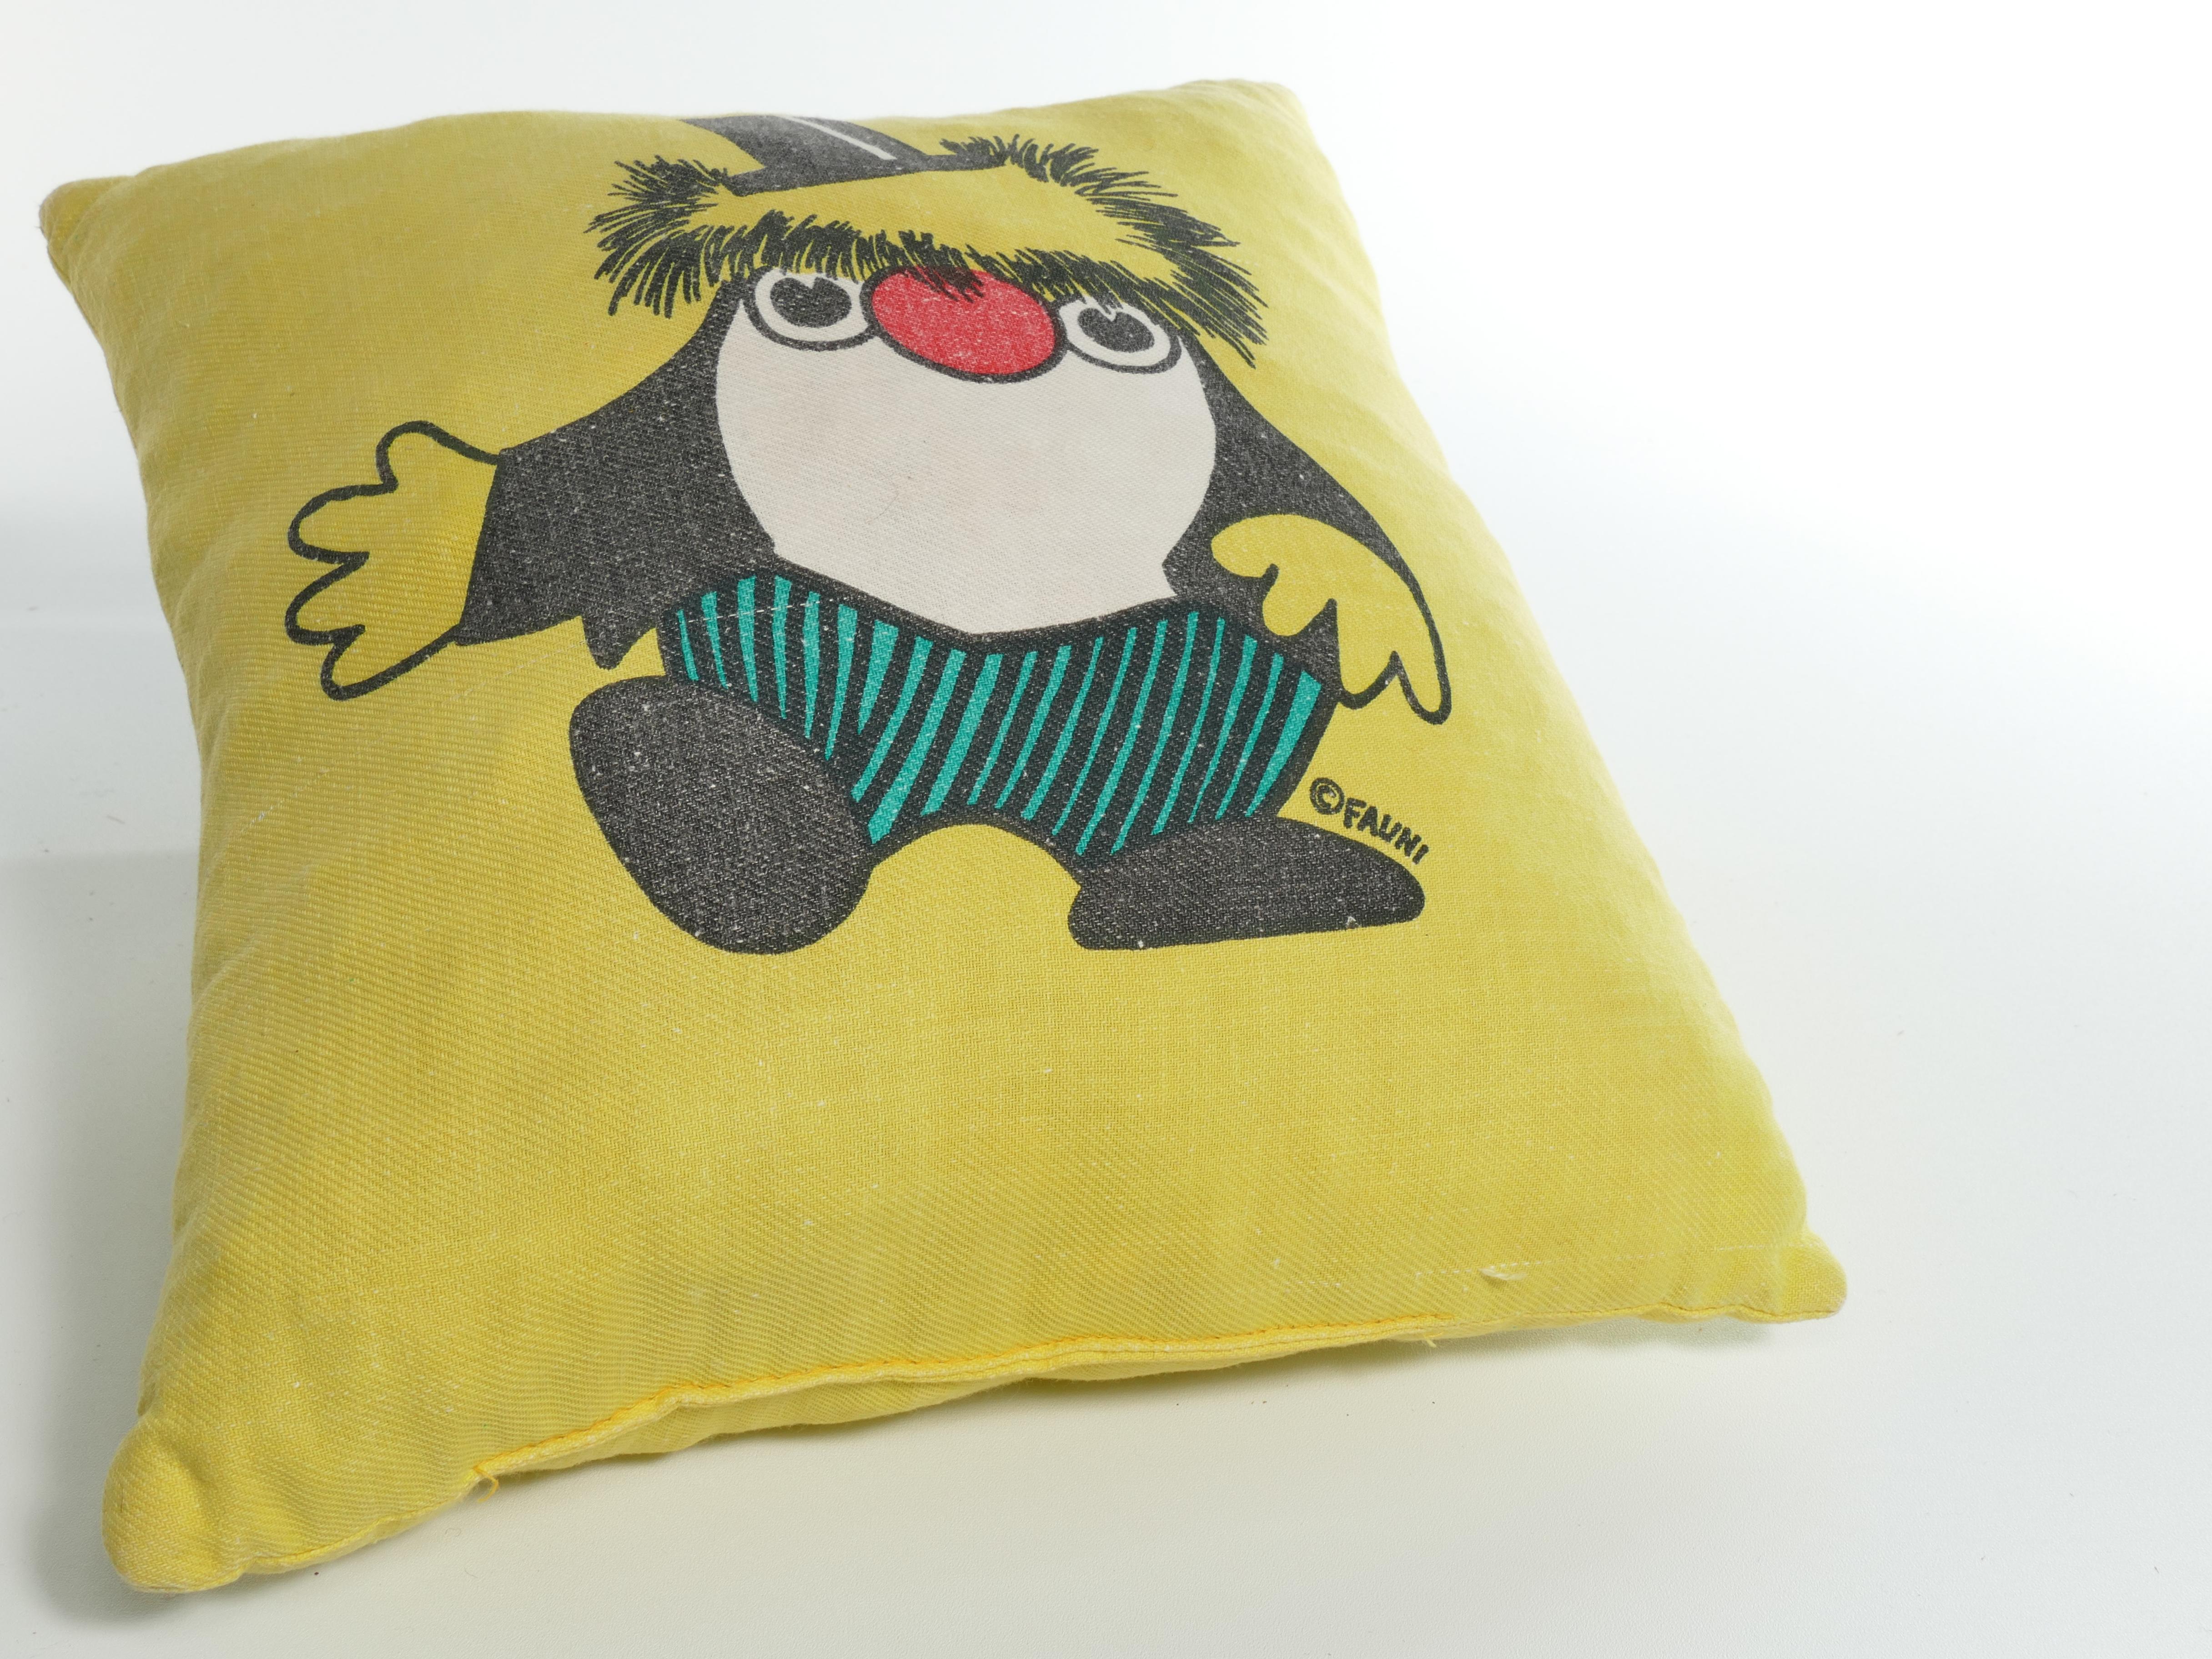 1970’s Atelier Fauni Yellow  Pillow Depicting Mr Edward the Business Troll  For Sale 7